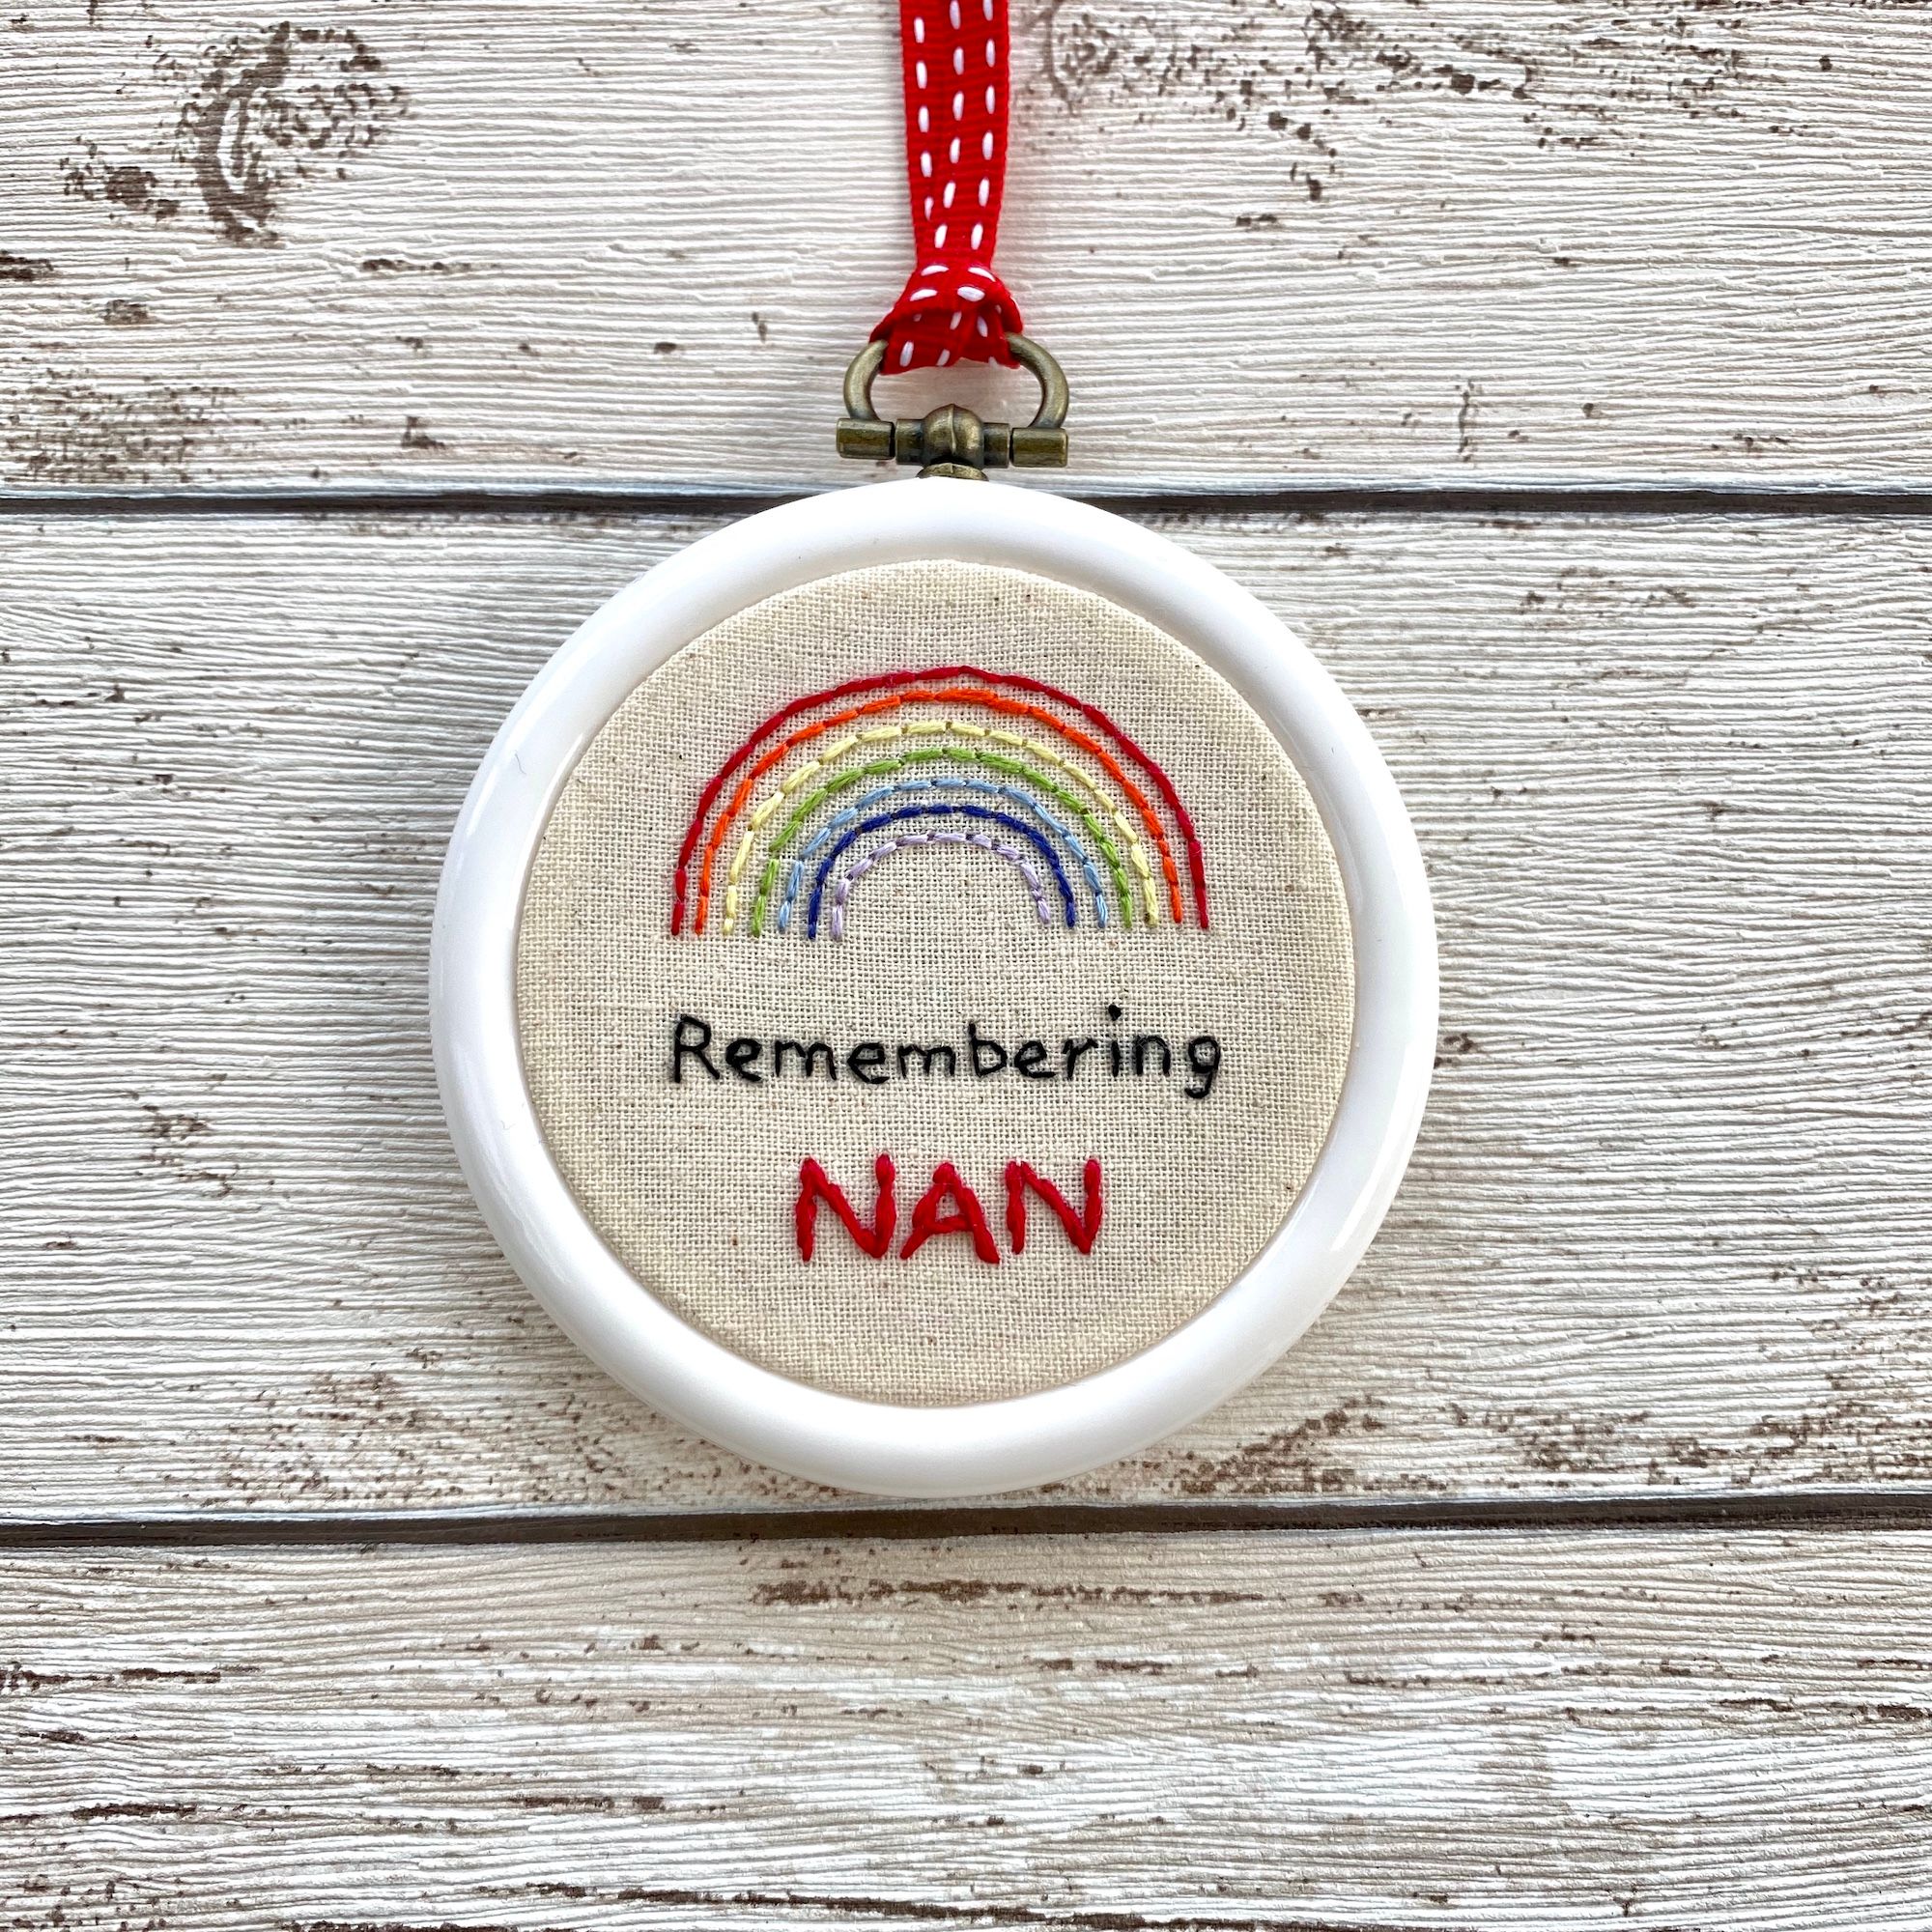 A white hoop with a stitched rainbow over the stitched words Remembering Nan.  Shown on a wooden surface.